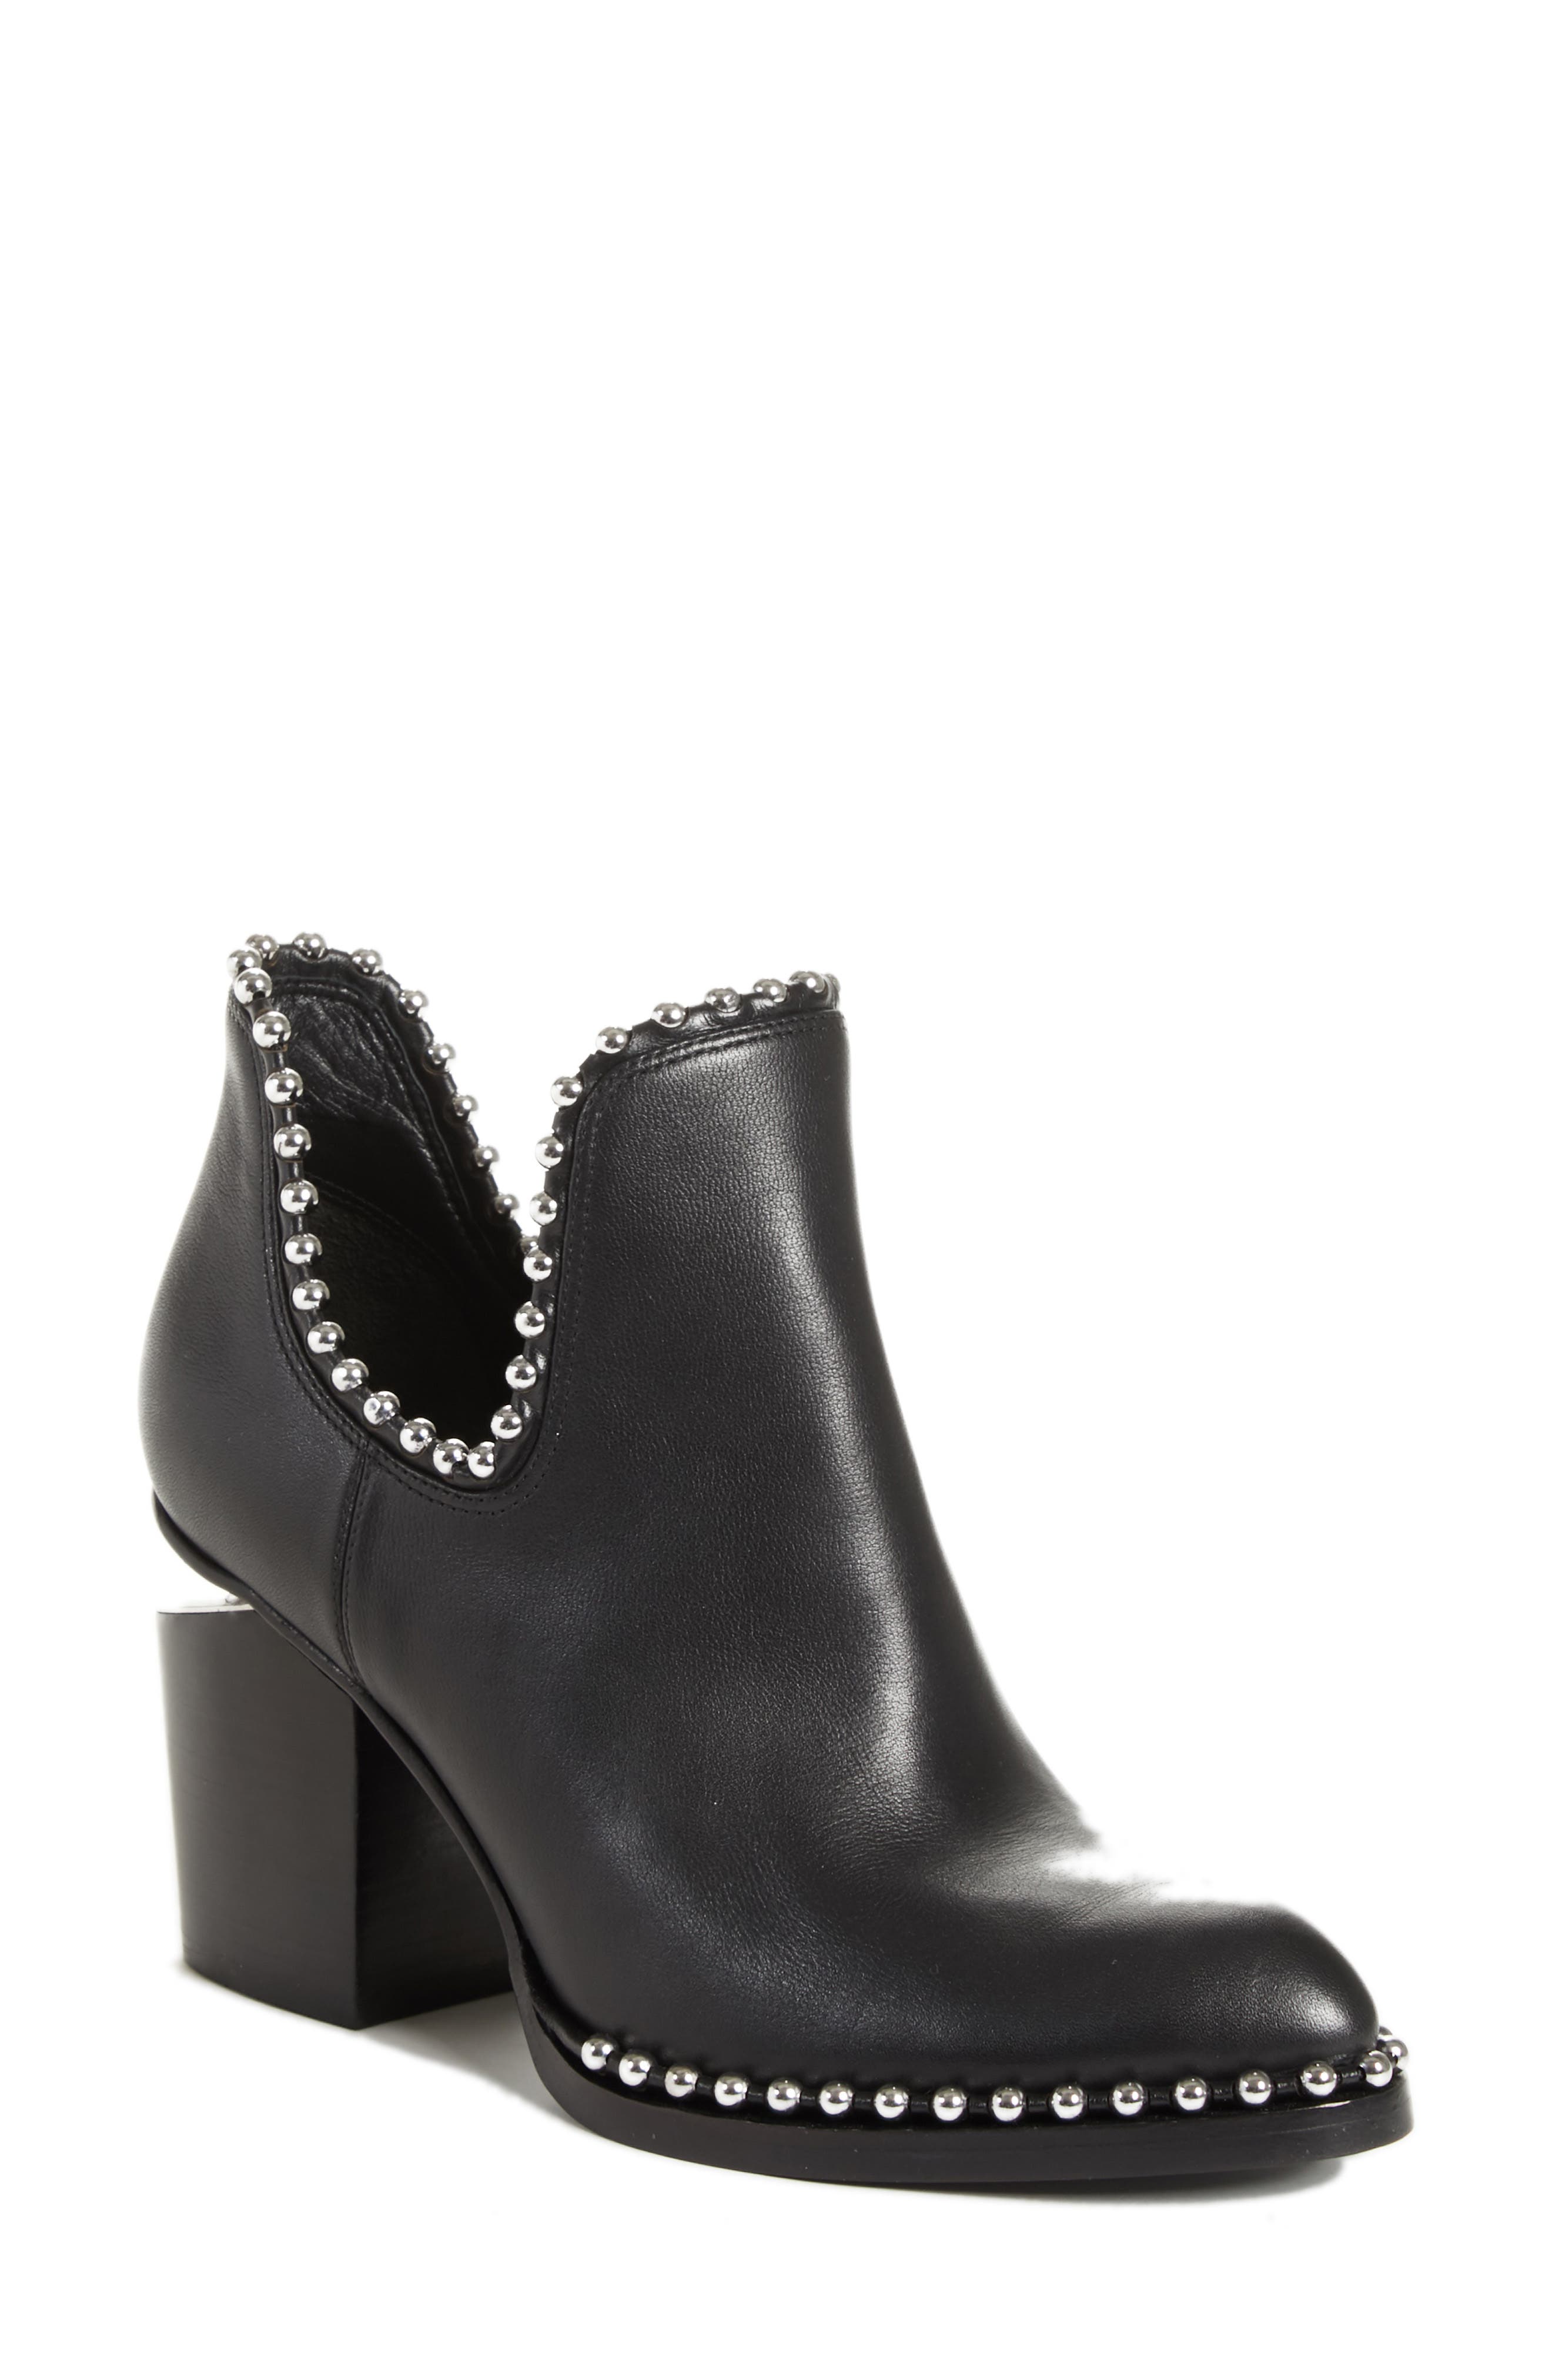 alexander wang boots with studs